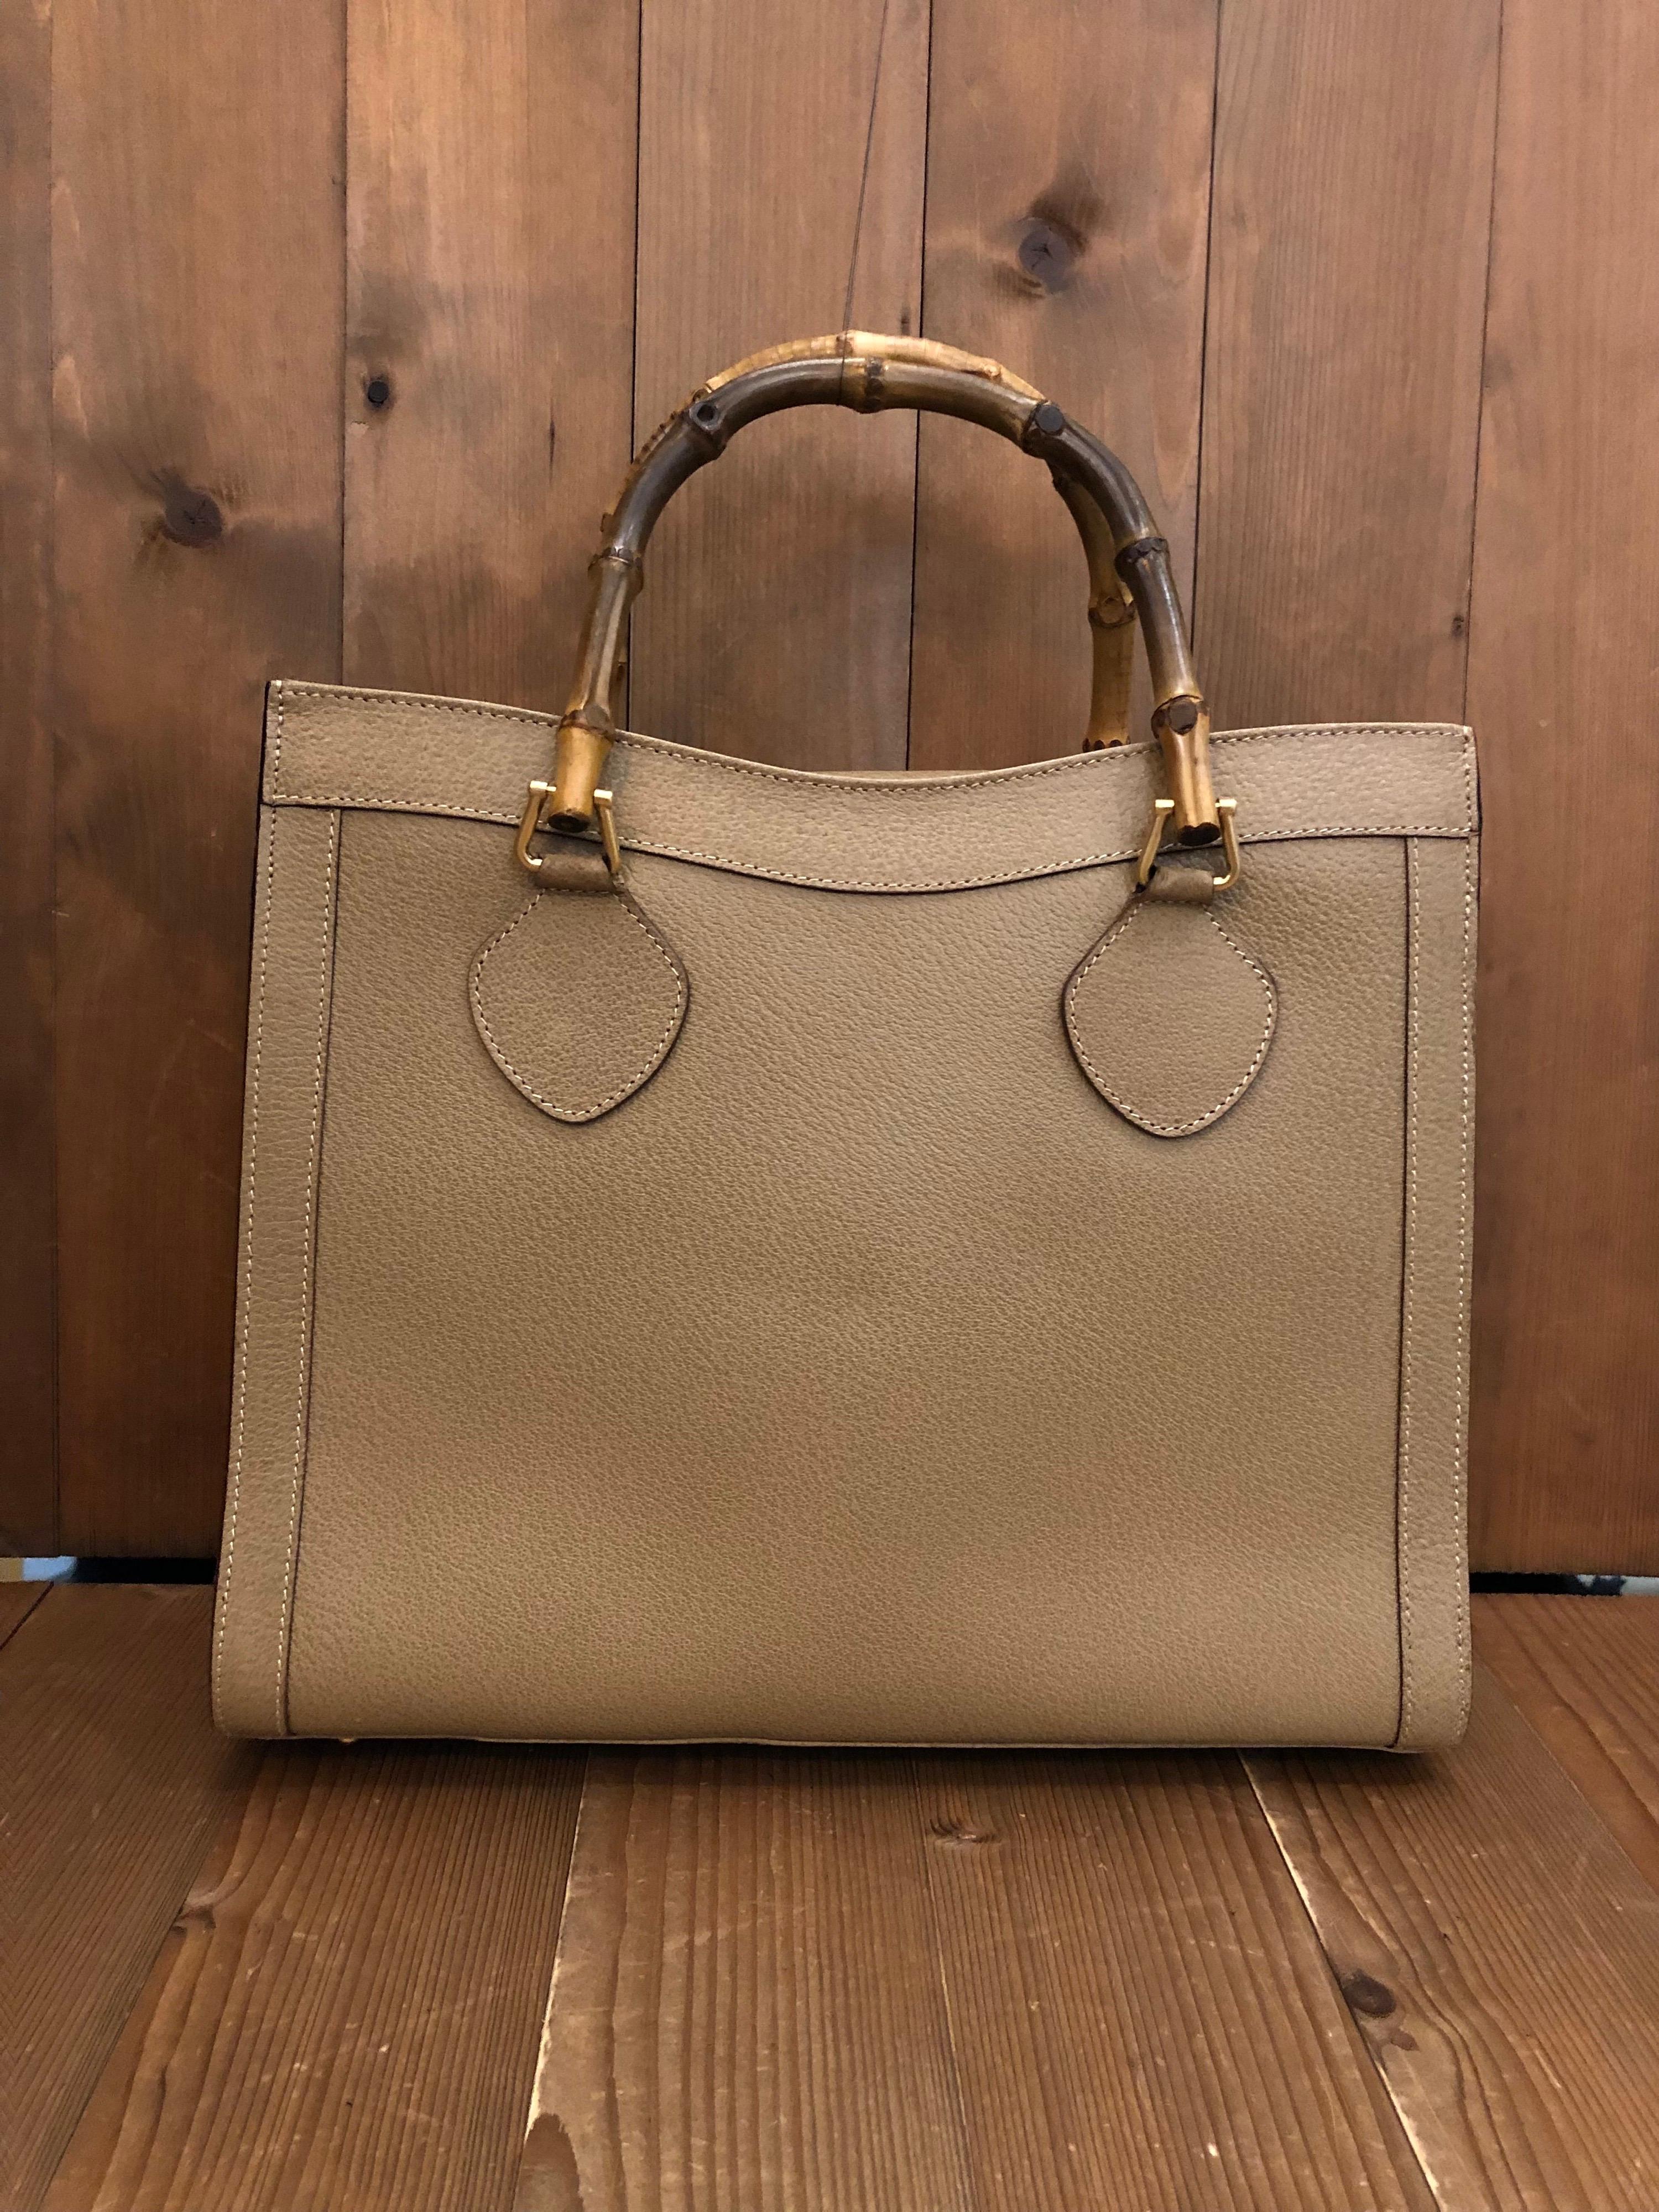 1990s Gucci bamboo tote in khaki leather. The Bamboo tote is one of Princess Diana's favorite purses. Gucci revamped this Bamboo tote in 2021 winter collection. Made in Italy. Measures 13 x 11 x 5.25 inches handle drop 5 inches. It features two main